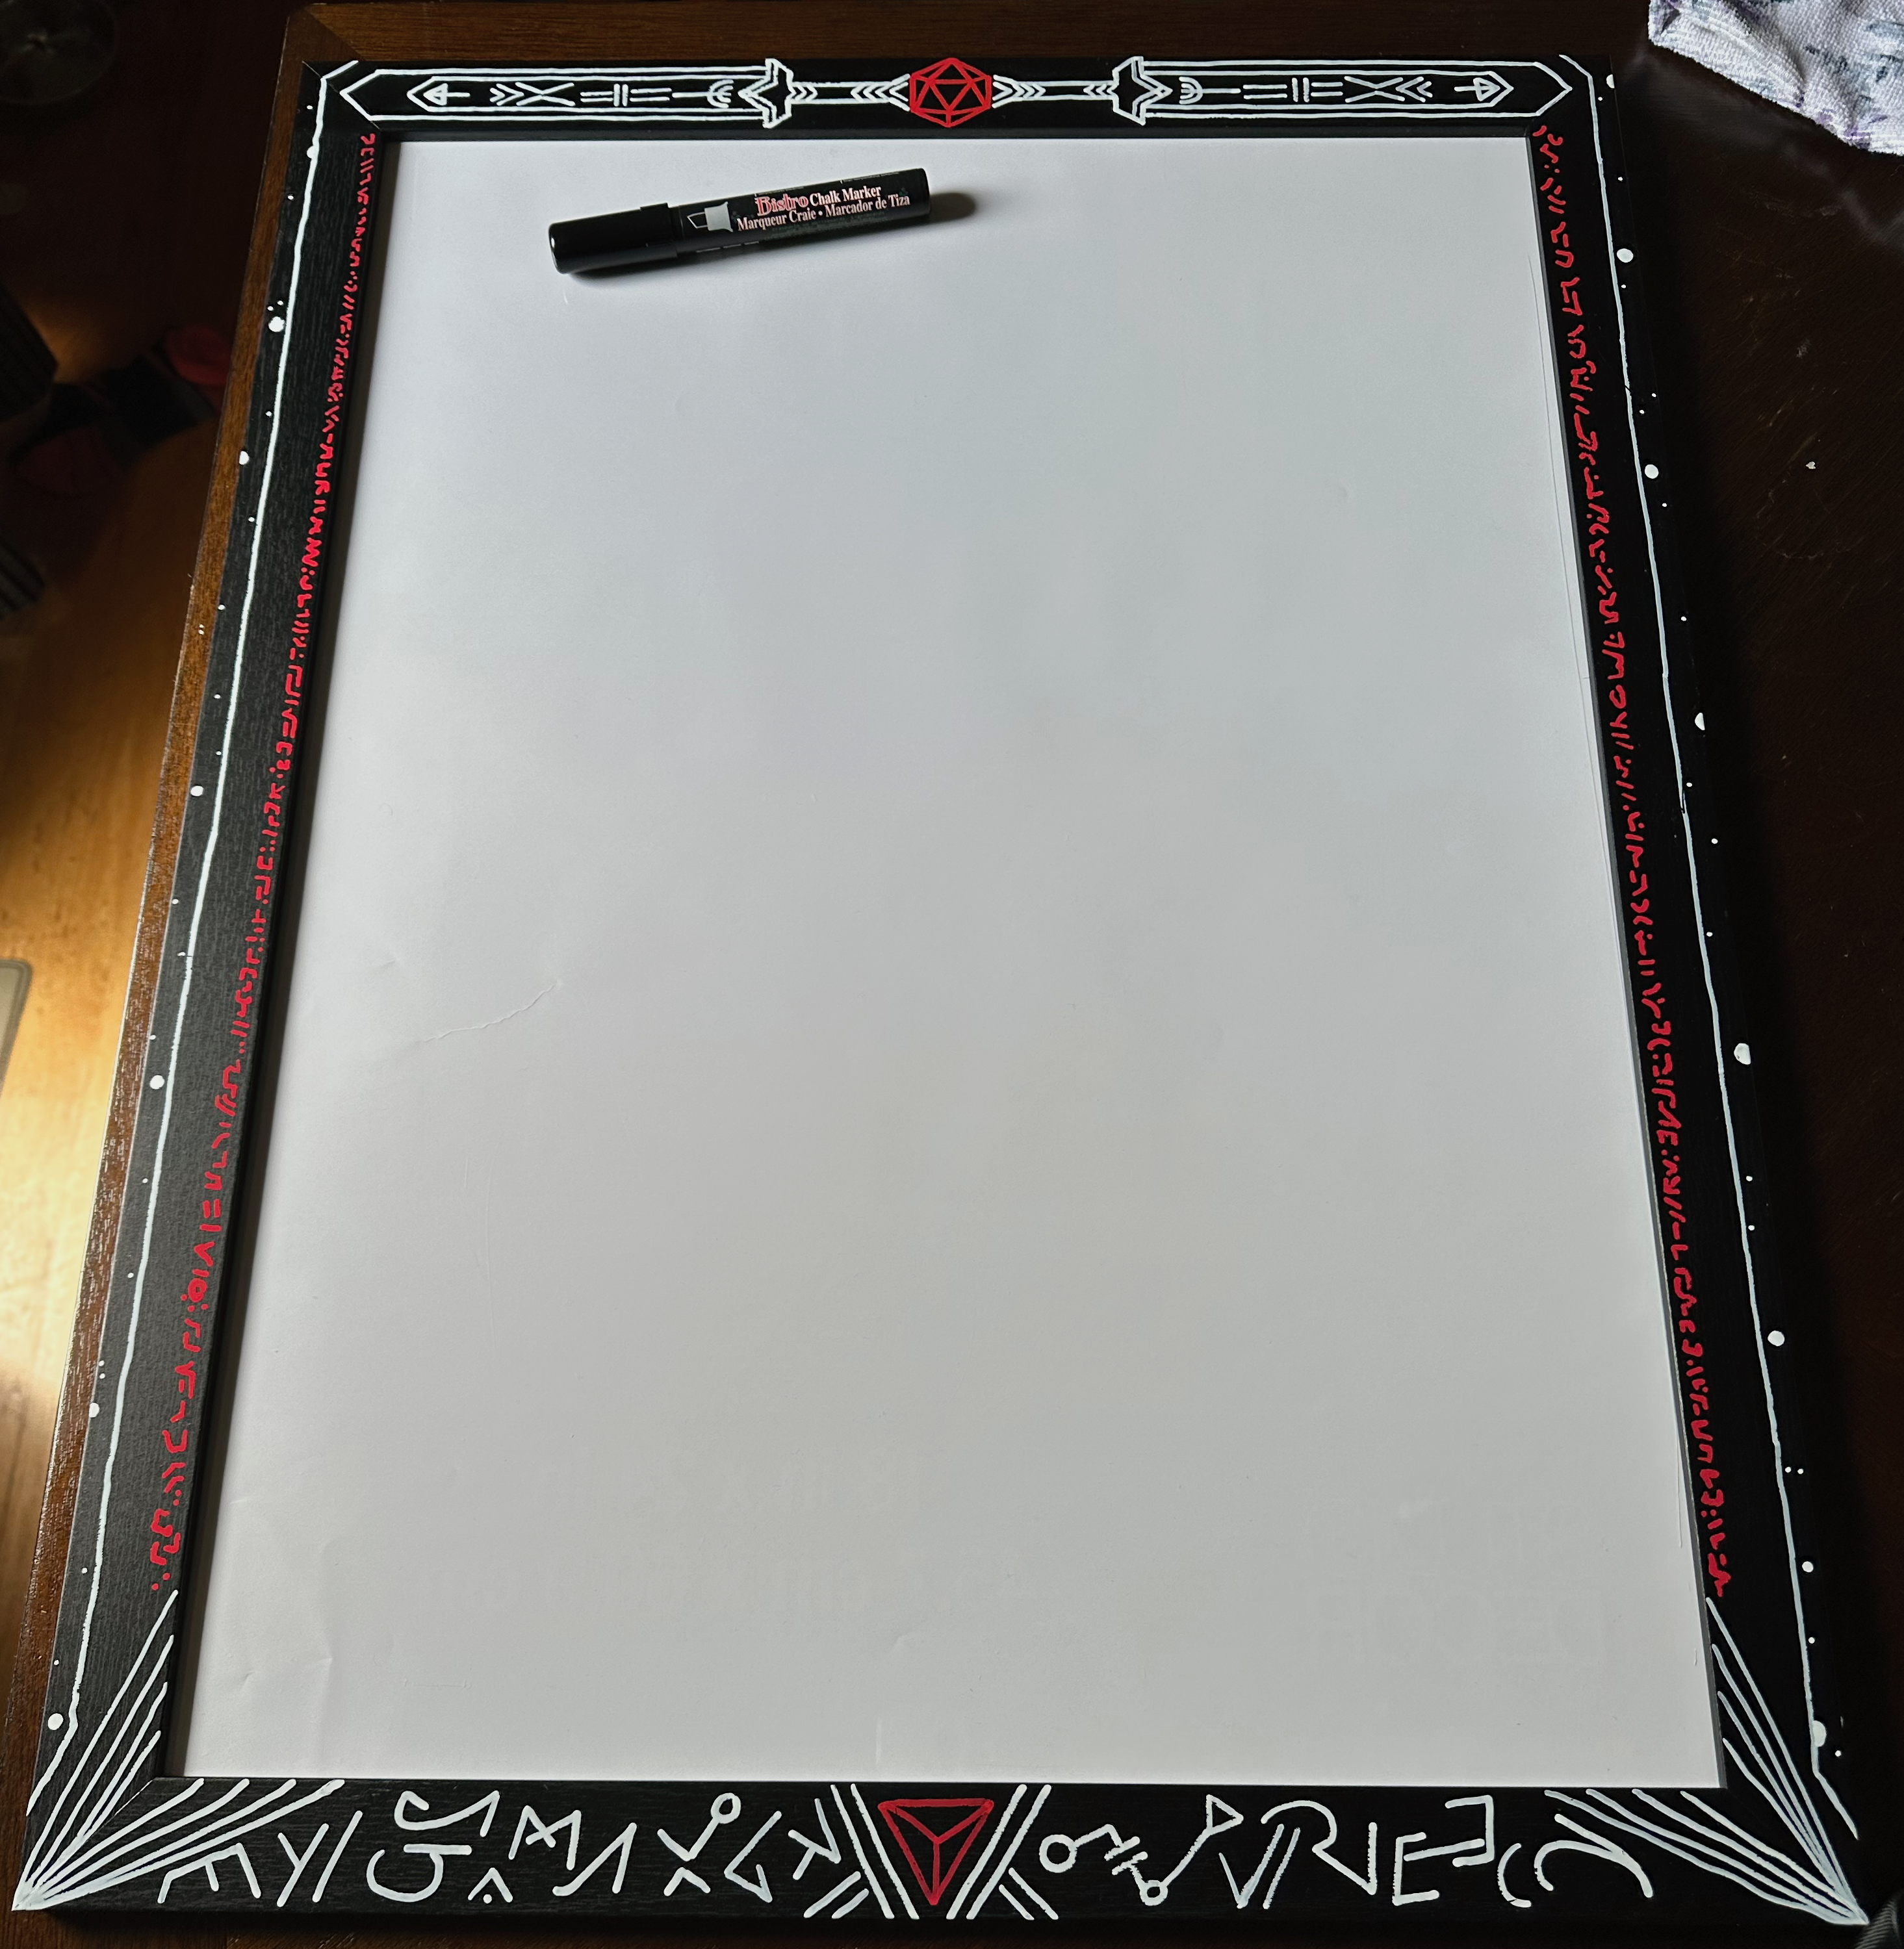 A black frame decorated with white and red runes, patterns, swords, and dice. It’s framing an empty white space with a black chalk marker lying on top.